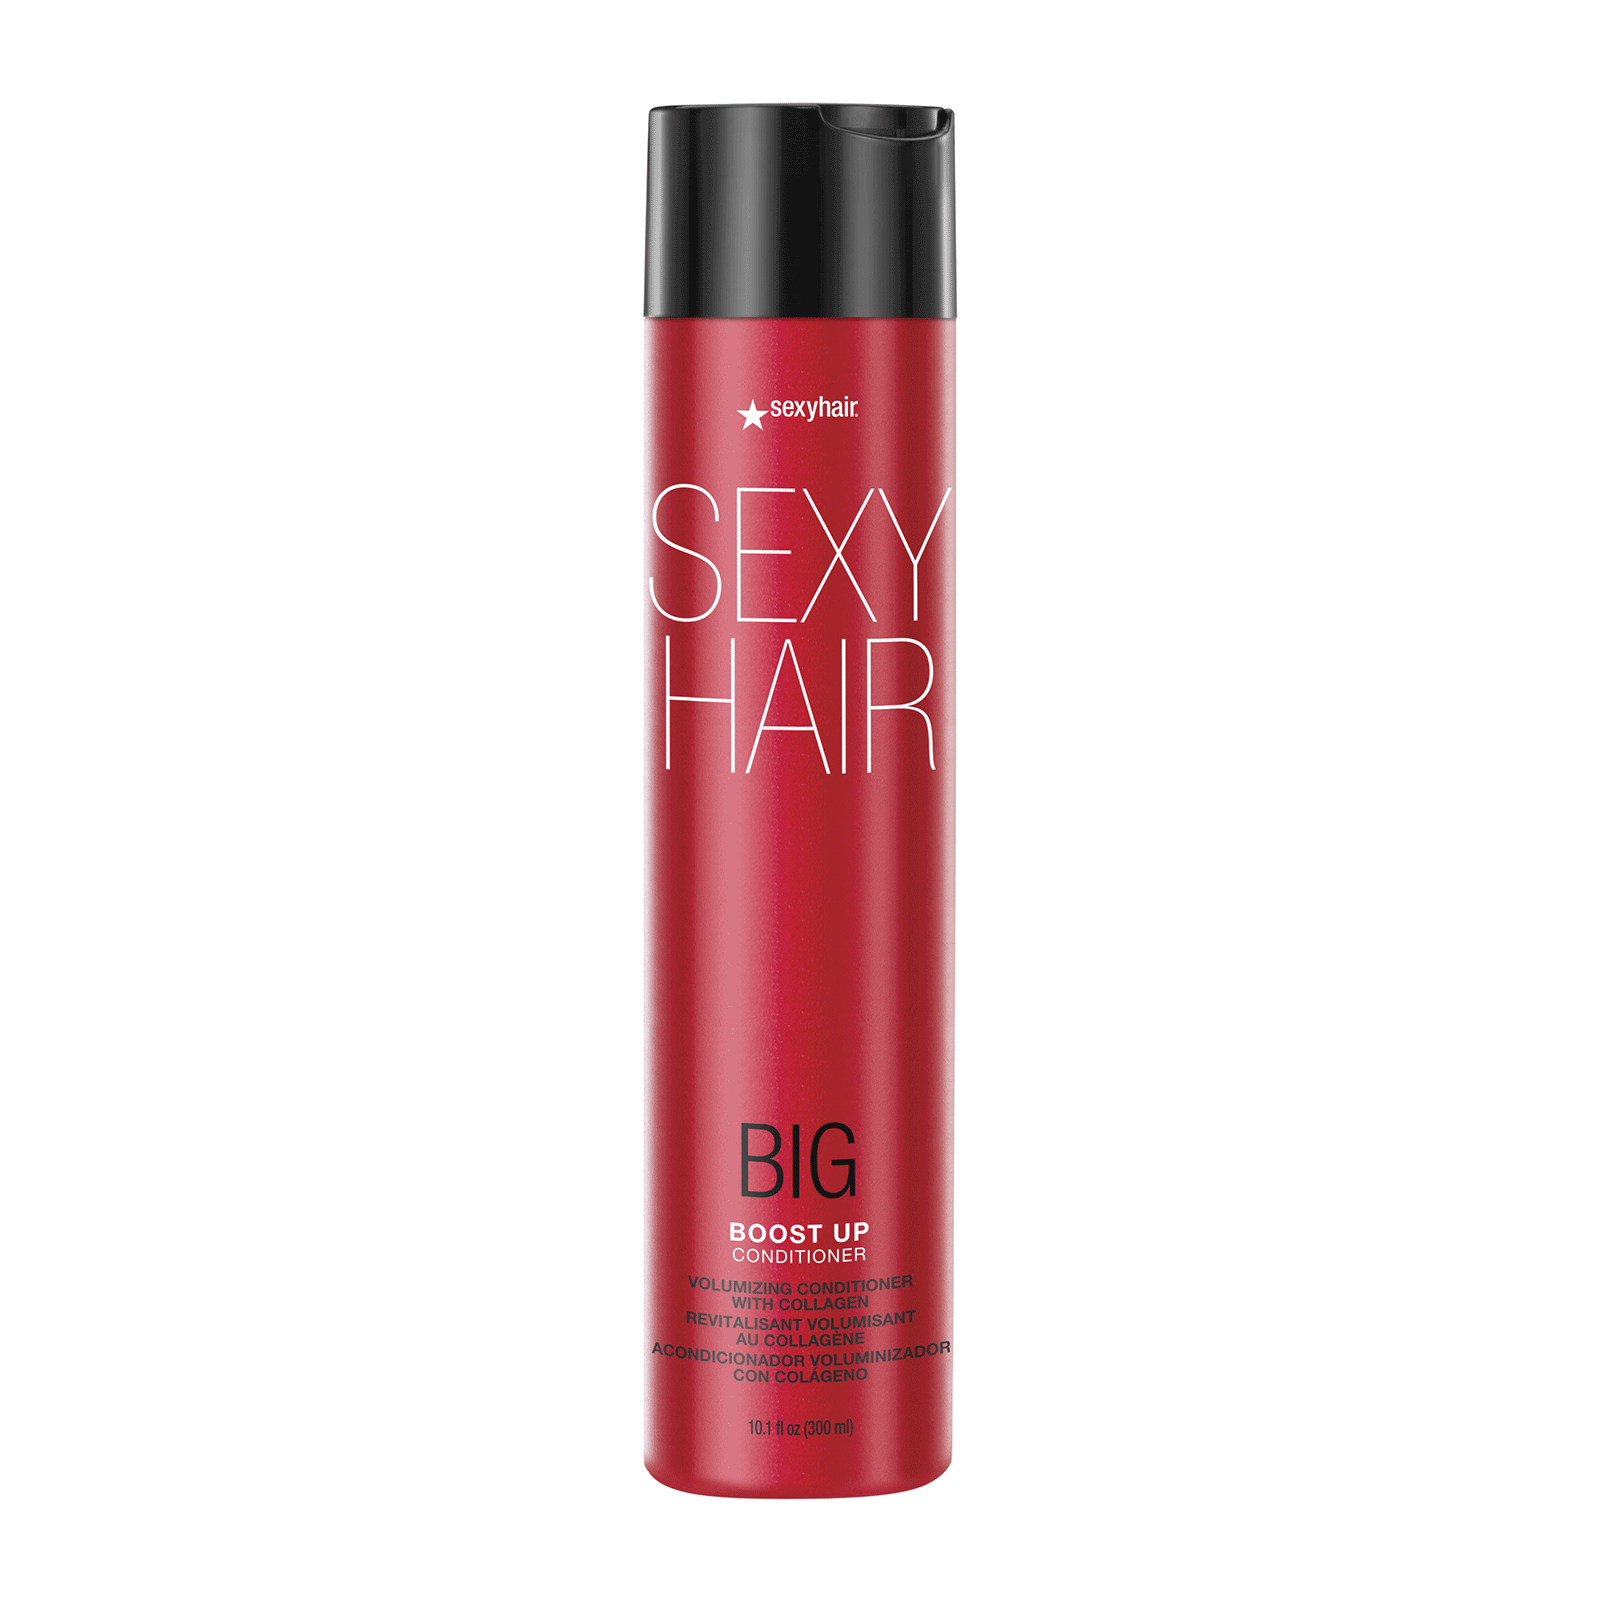 Sexy Hair Concepts Big Boost Up Volumizing Conditioner with Collagen 10.1oz